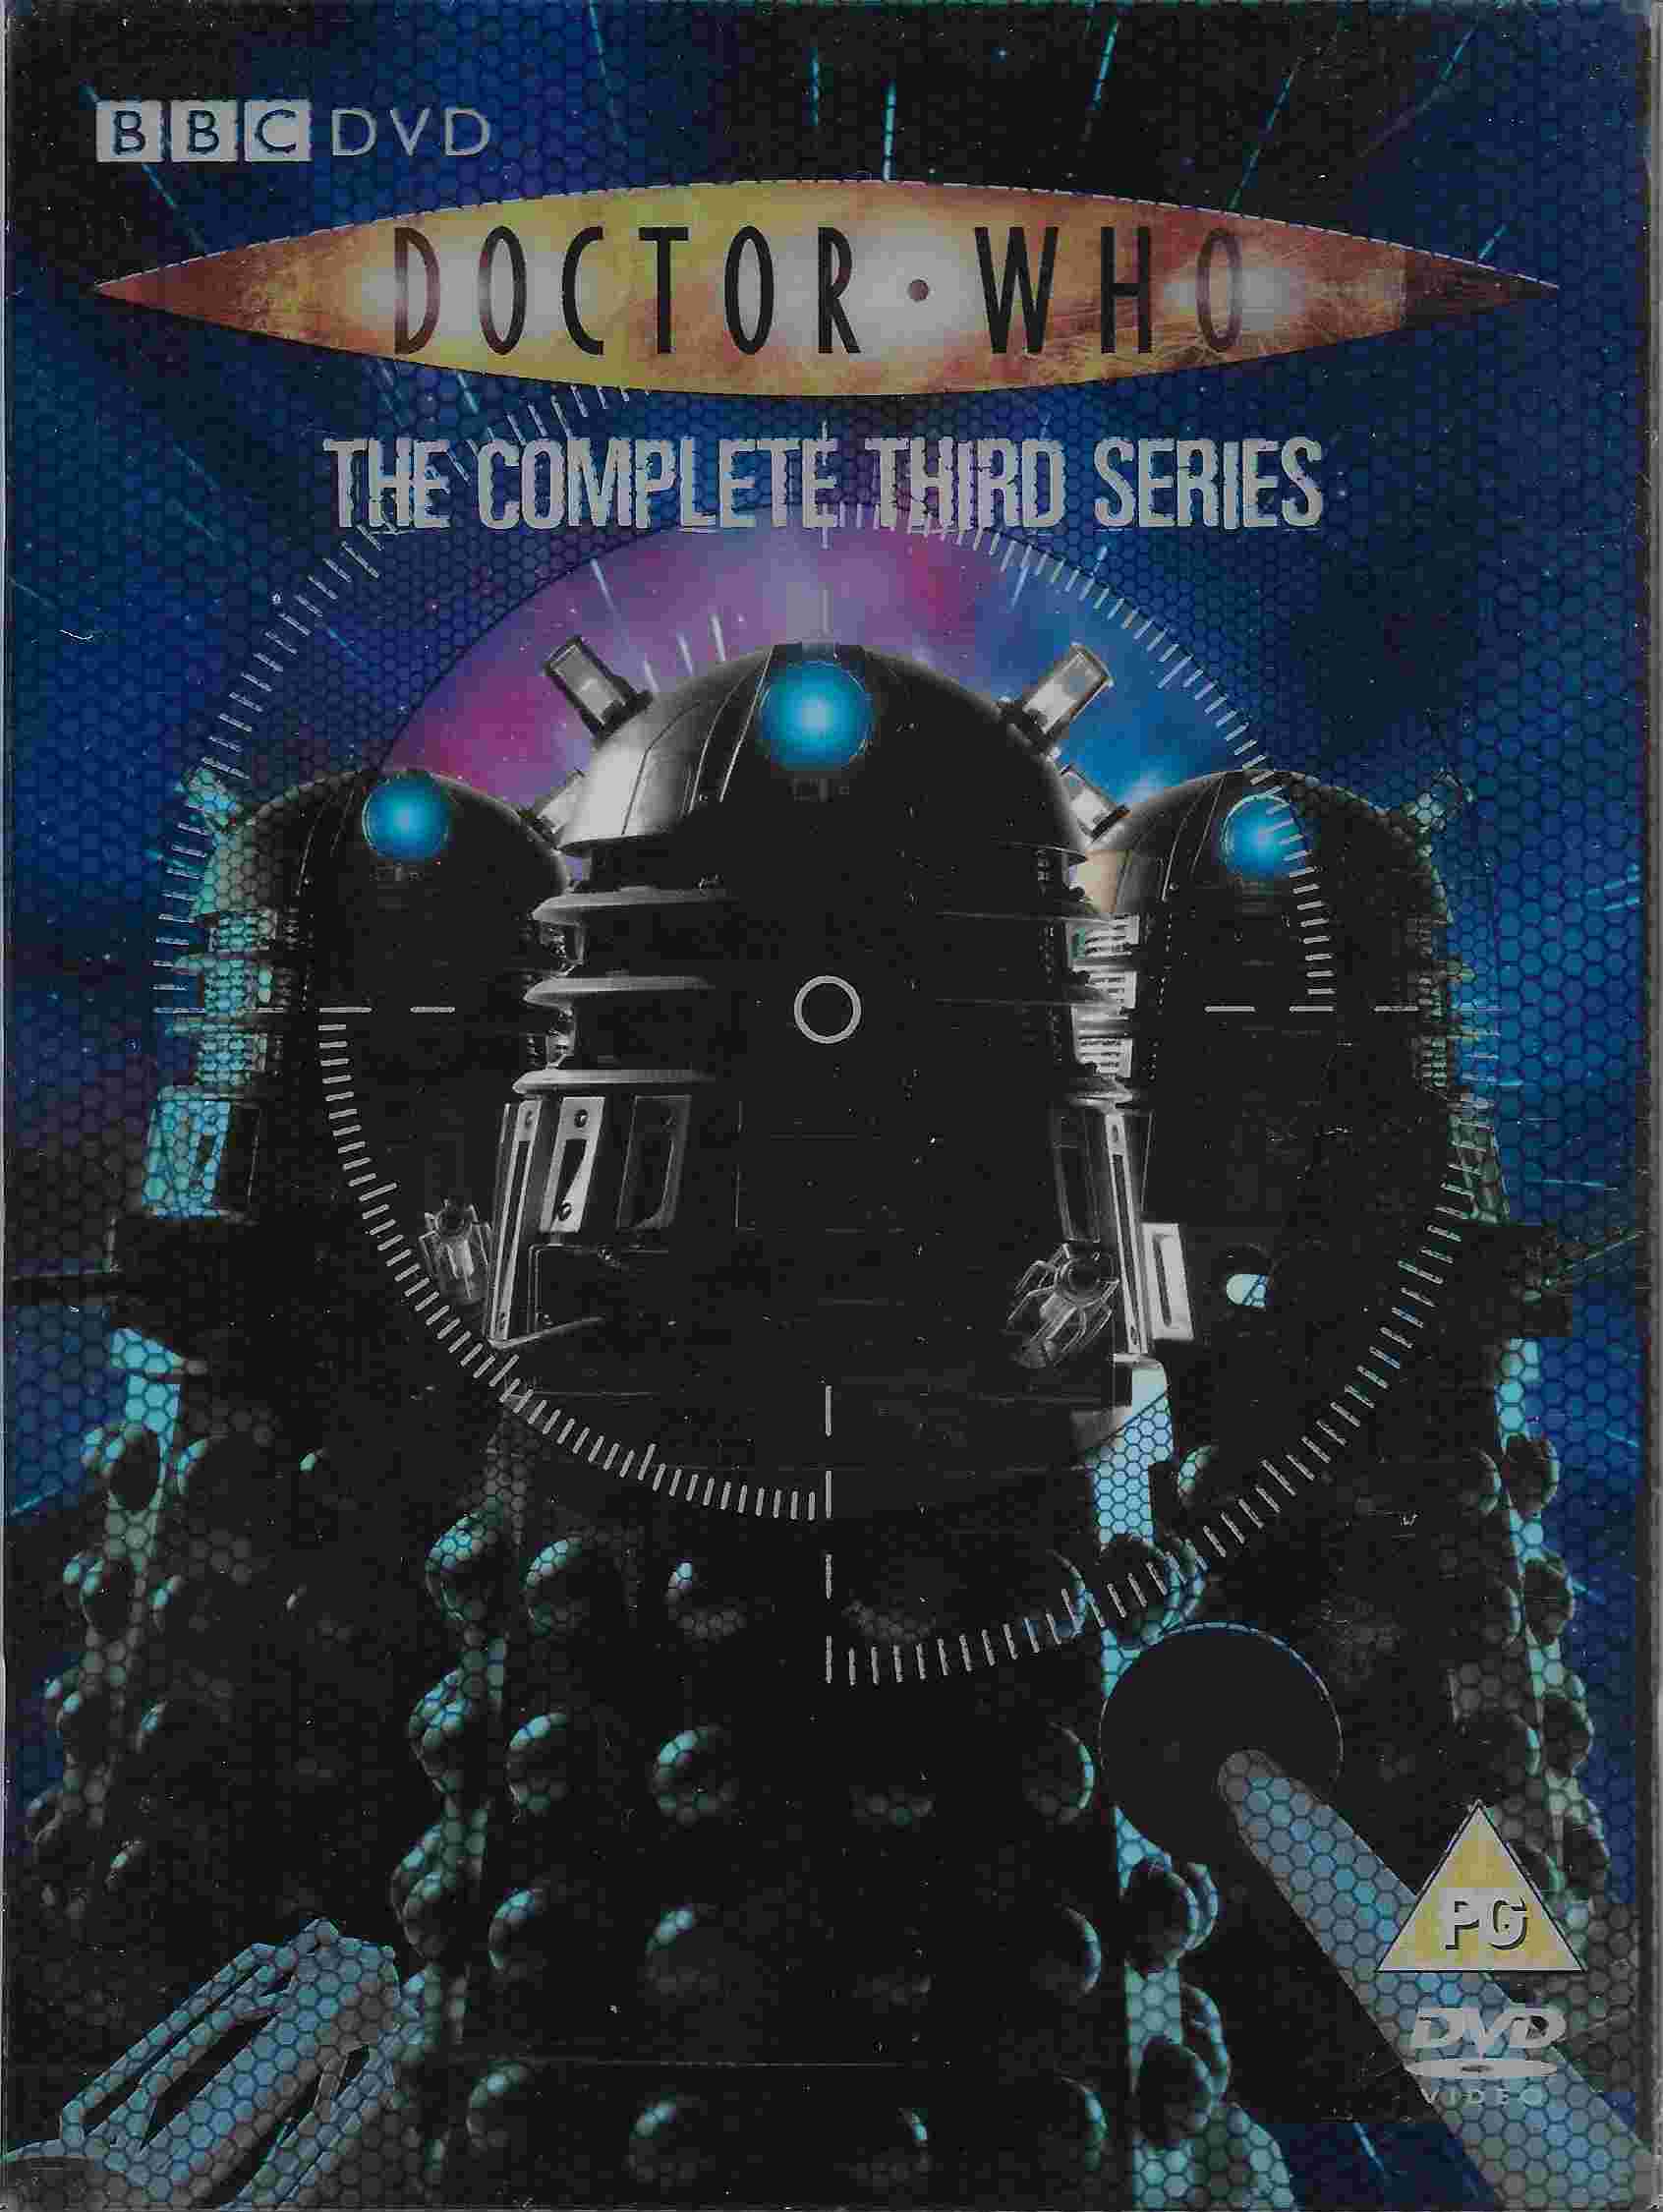 Picture of BBCDVD 2579 Doctor Who - Series 3 by artist Various from the BBC records and Tapes library